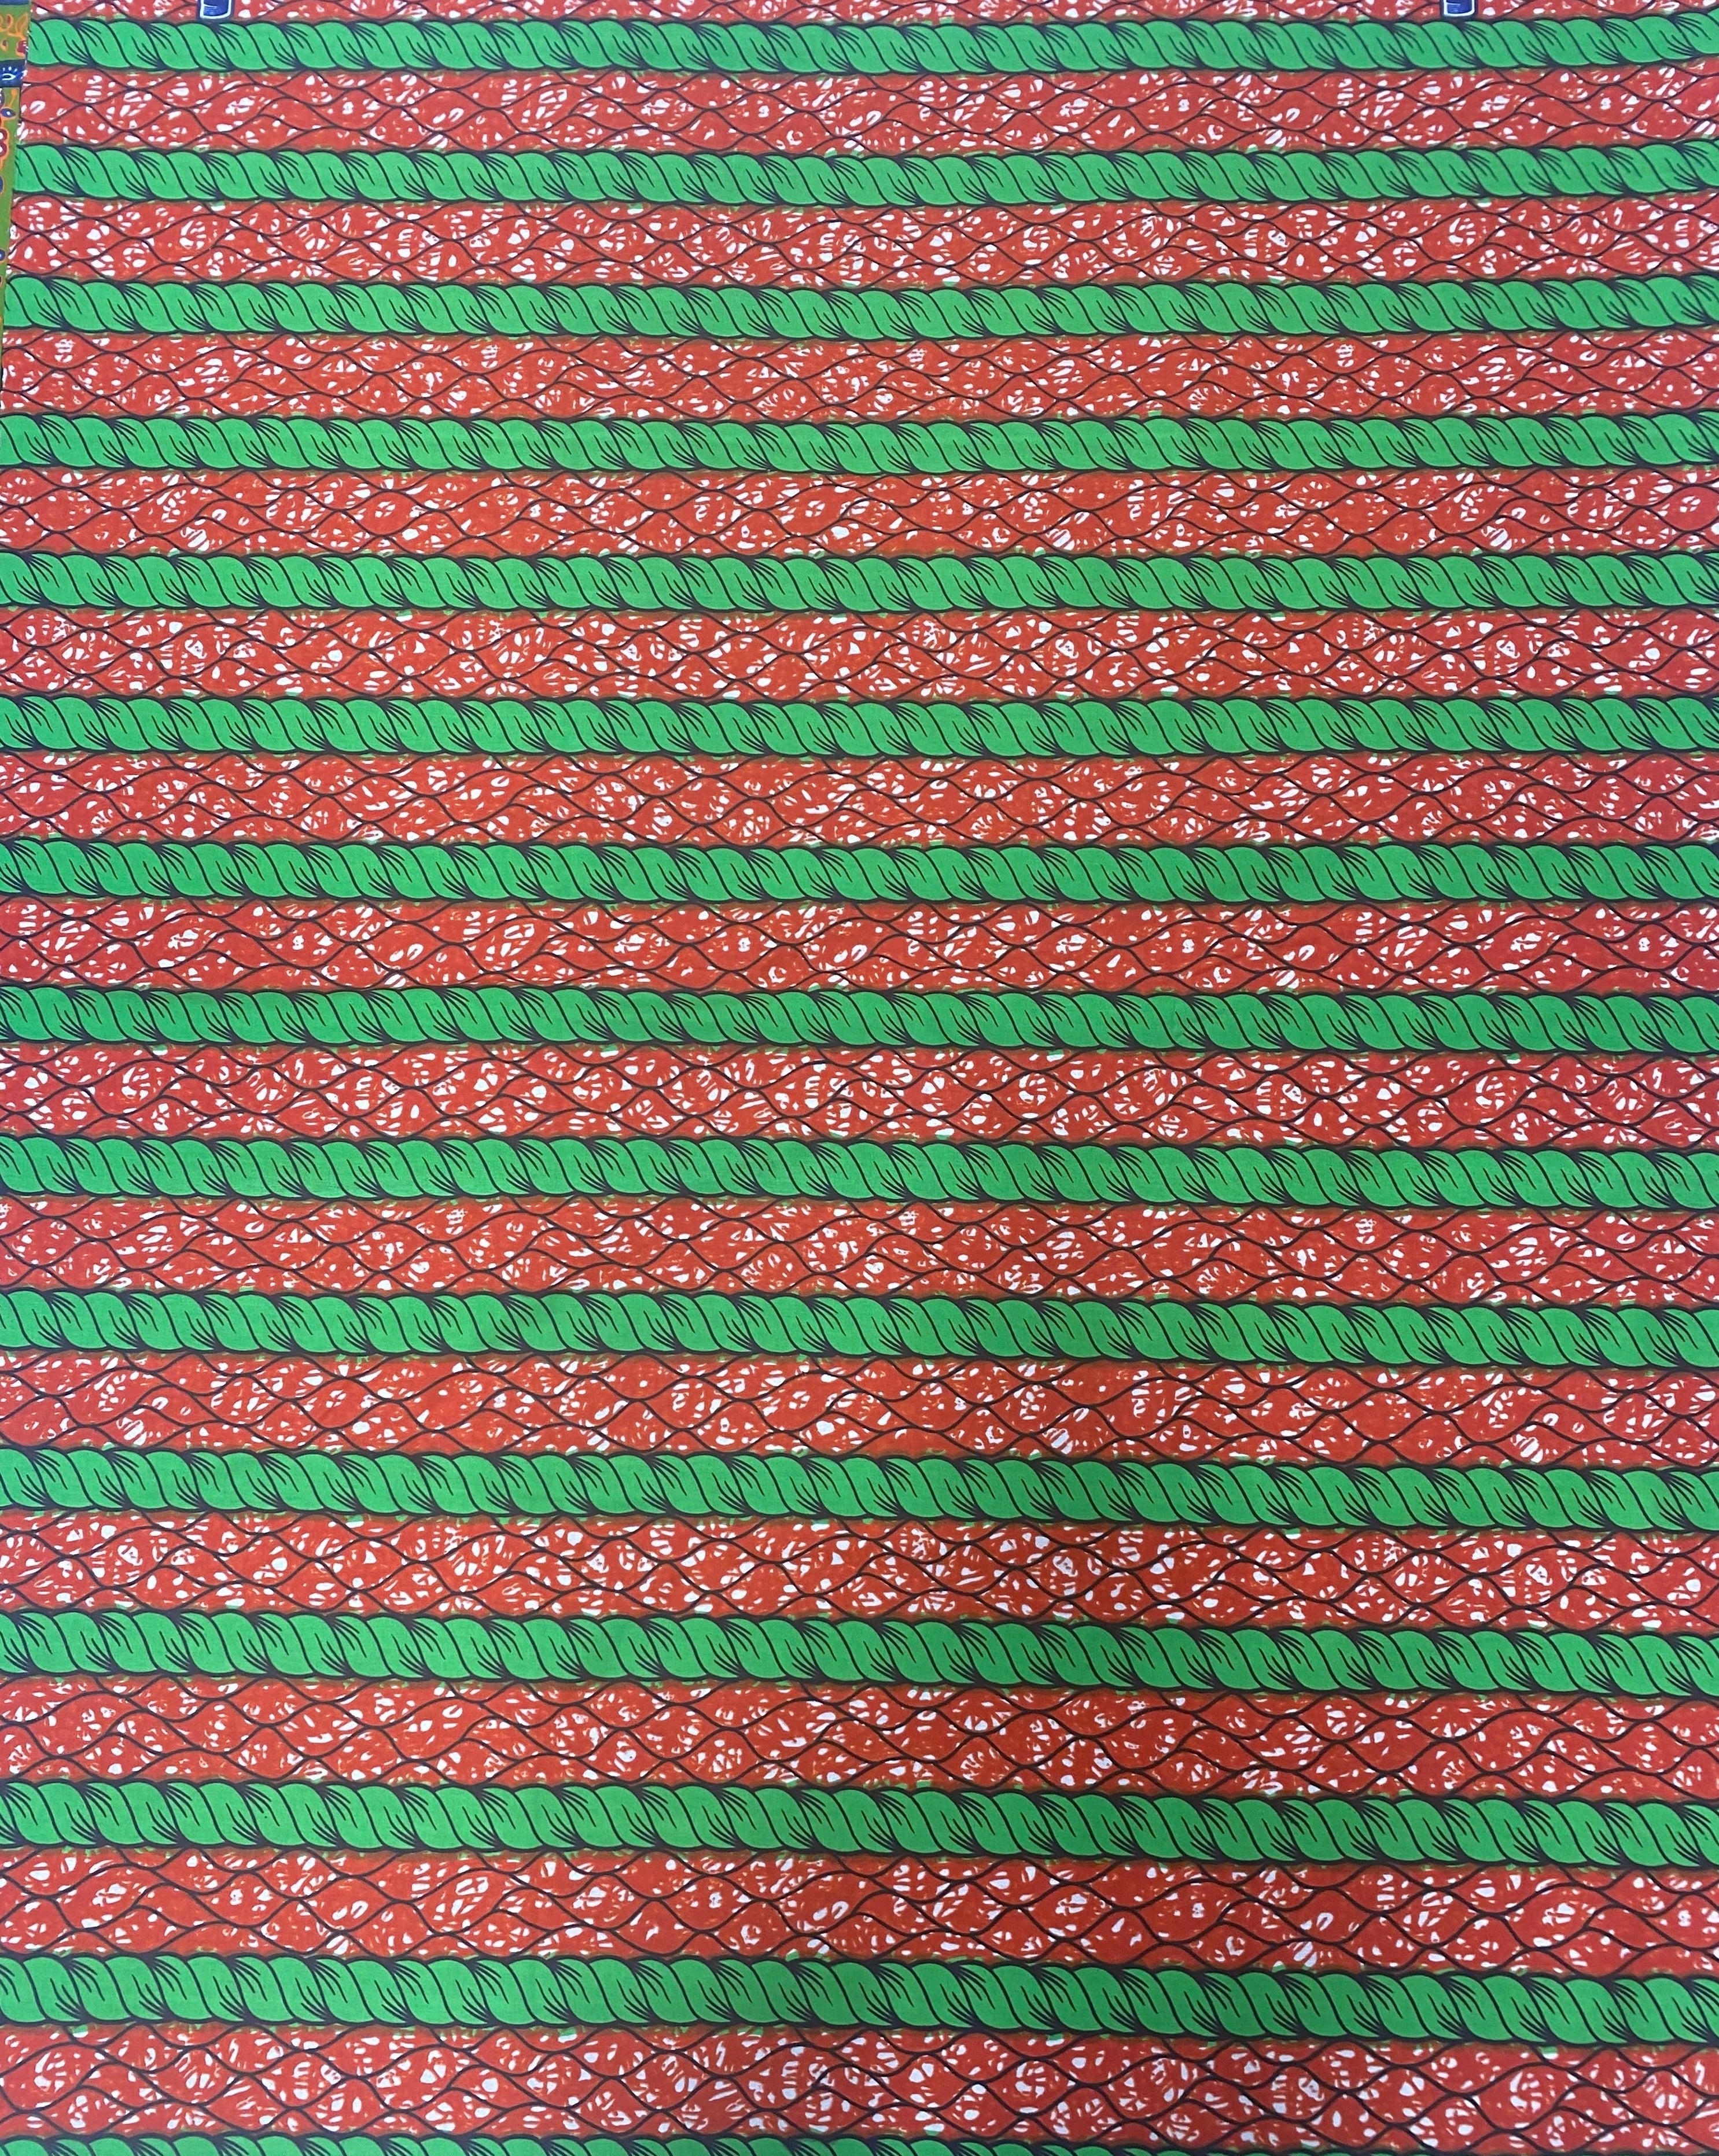 Festive Rope African Print Fabric - 100% Cotton, 44" Wide, Colorful and Celebratory